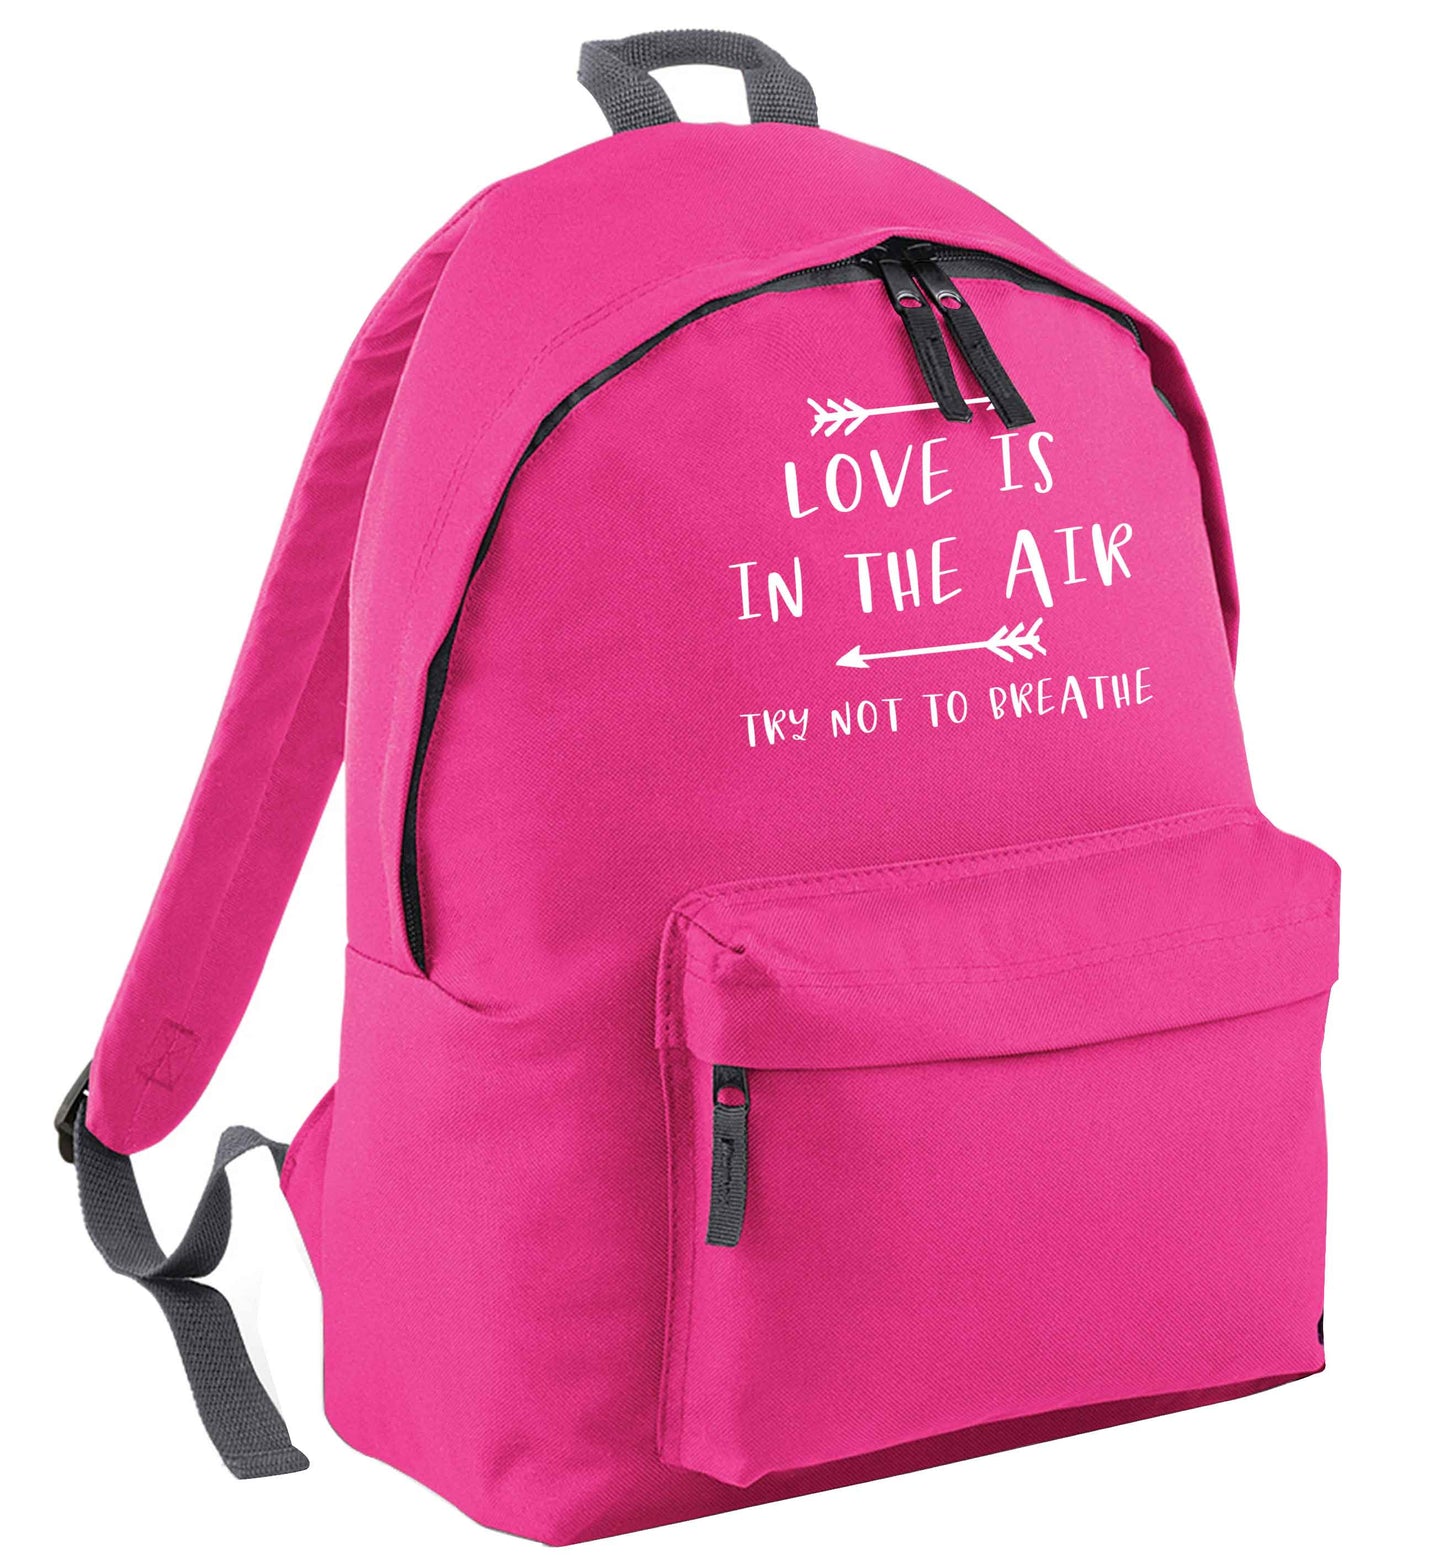 Love is in the air try not to breathe pink adults backpack